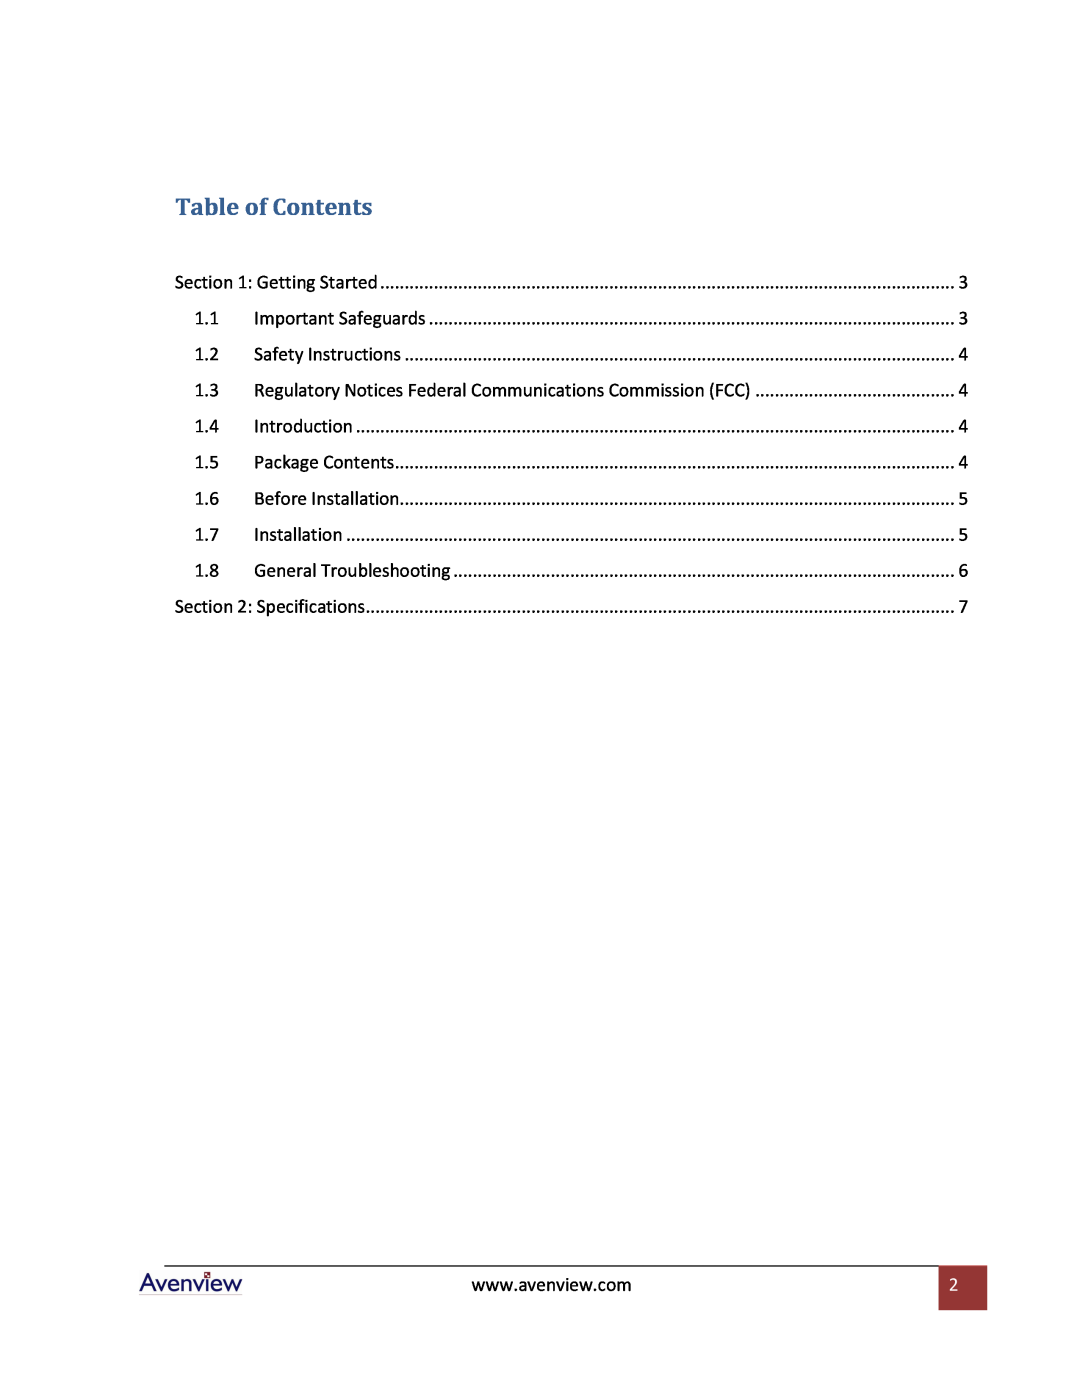 Avenview FO-DVI-1080LC-Set specifications Table of Contents, Regulatory Notices Federal Communications Commission FCC 